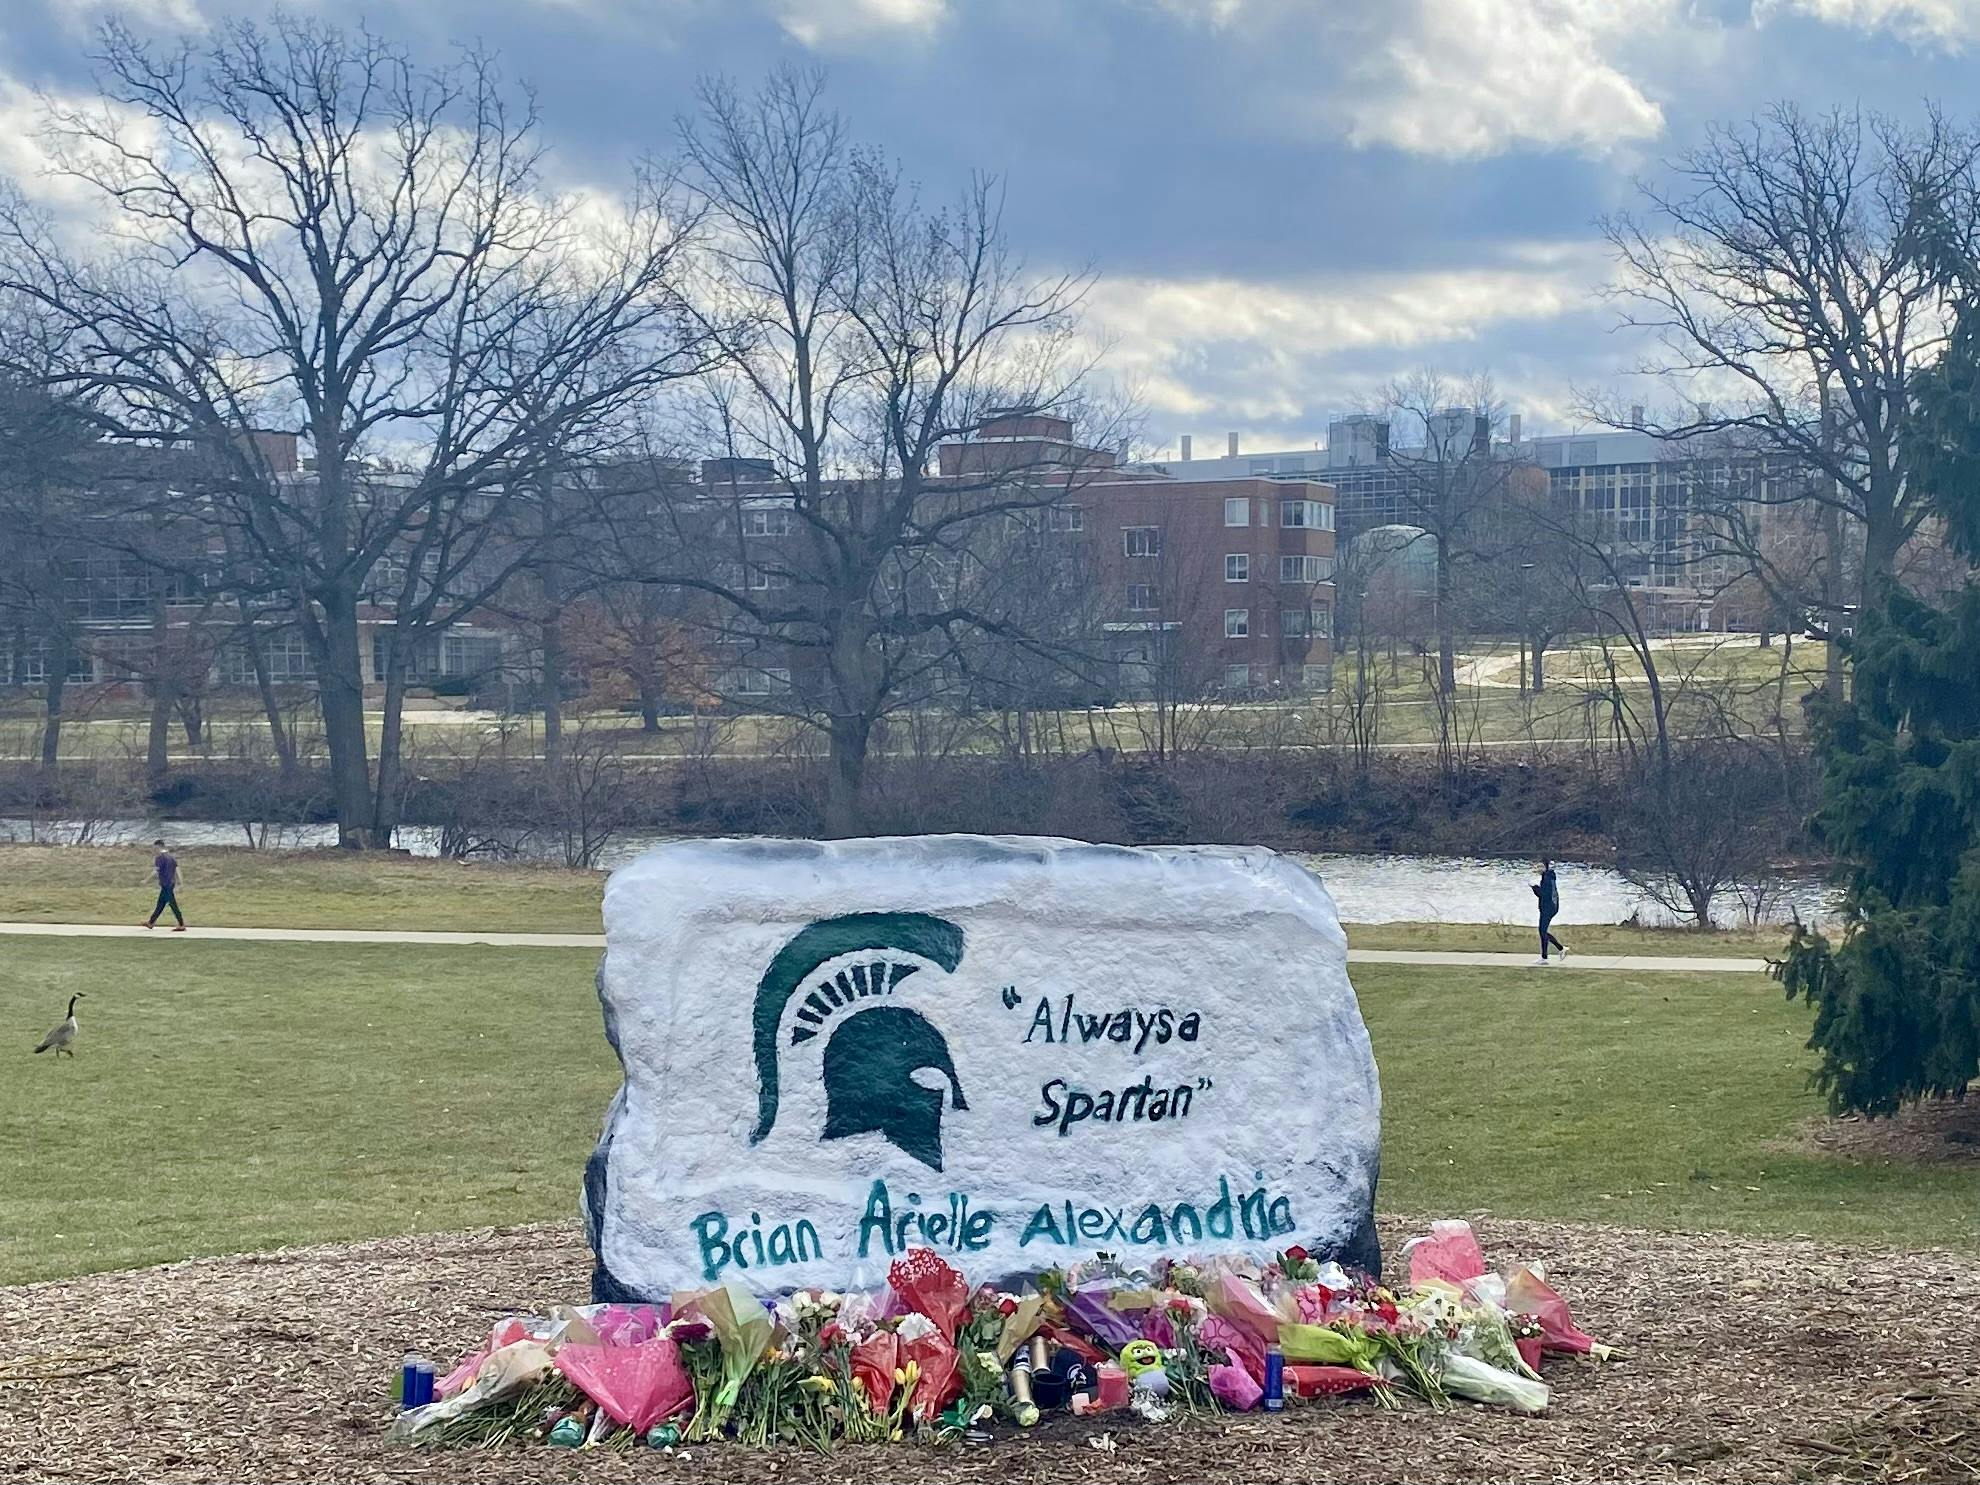 <p>Detroit based artist Anthony Lee painted The Rock on Farm Lane with "Always a Spartan" and the names of the students who lost their lives during the on-campus mass shooting on Feb. 13, 2023, at the request of the university.</p>